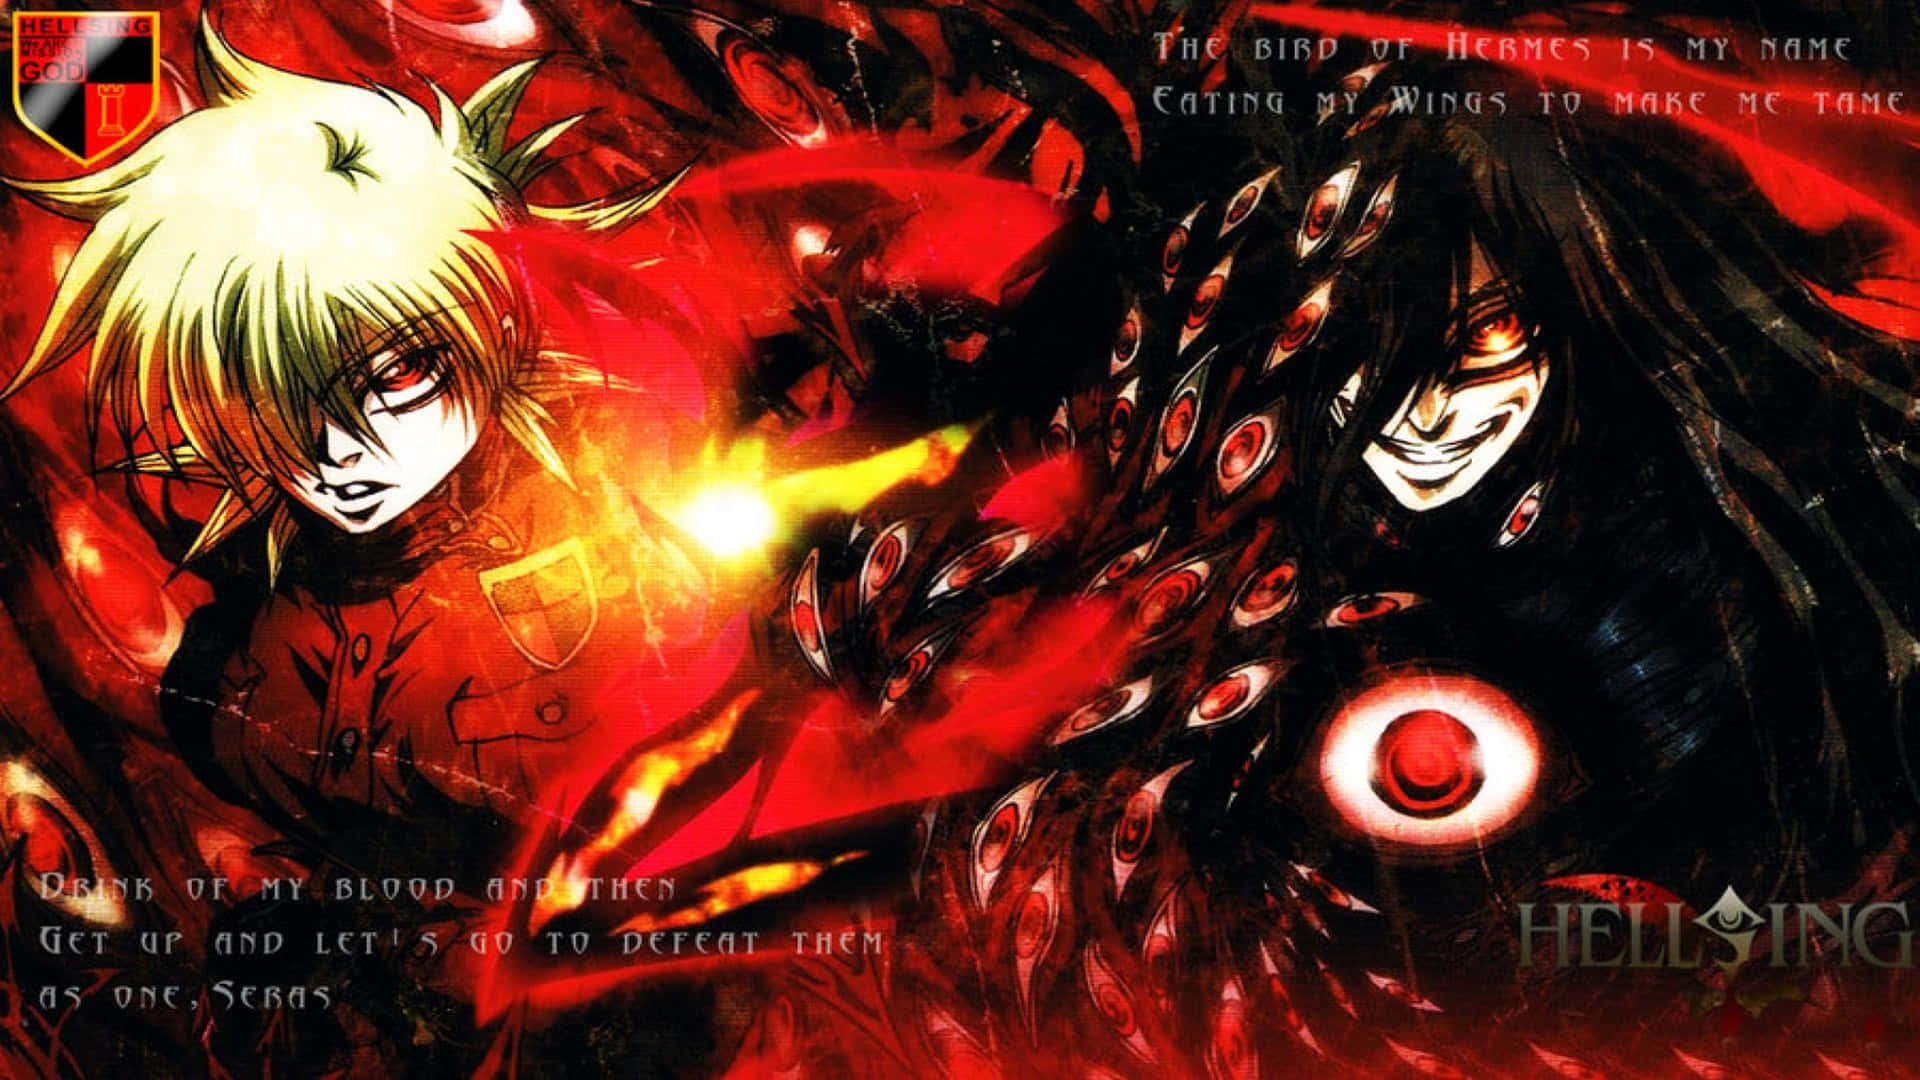 Alucard Hellsing Matte Finish Poster Paper Print  Animation  Cartoons  posters in India  Buy art film design movie music nature and  educational paintingswallpapers at Flipkartcom